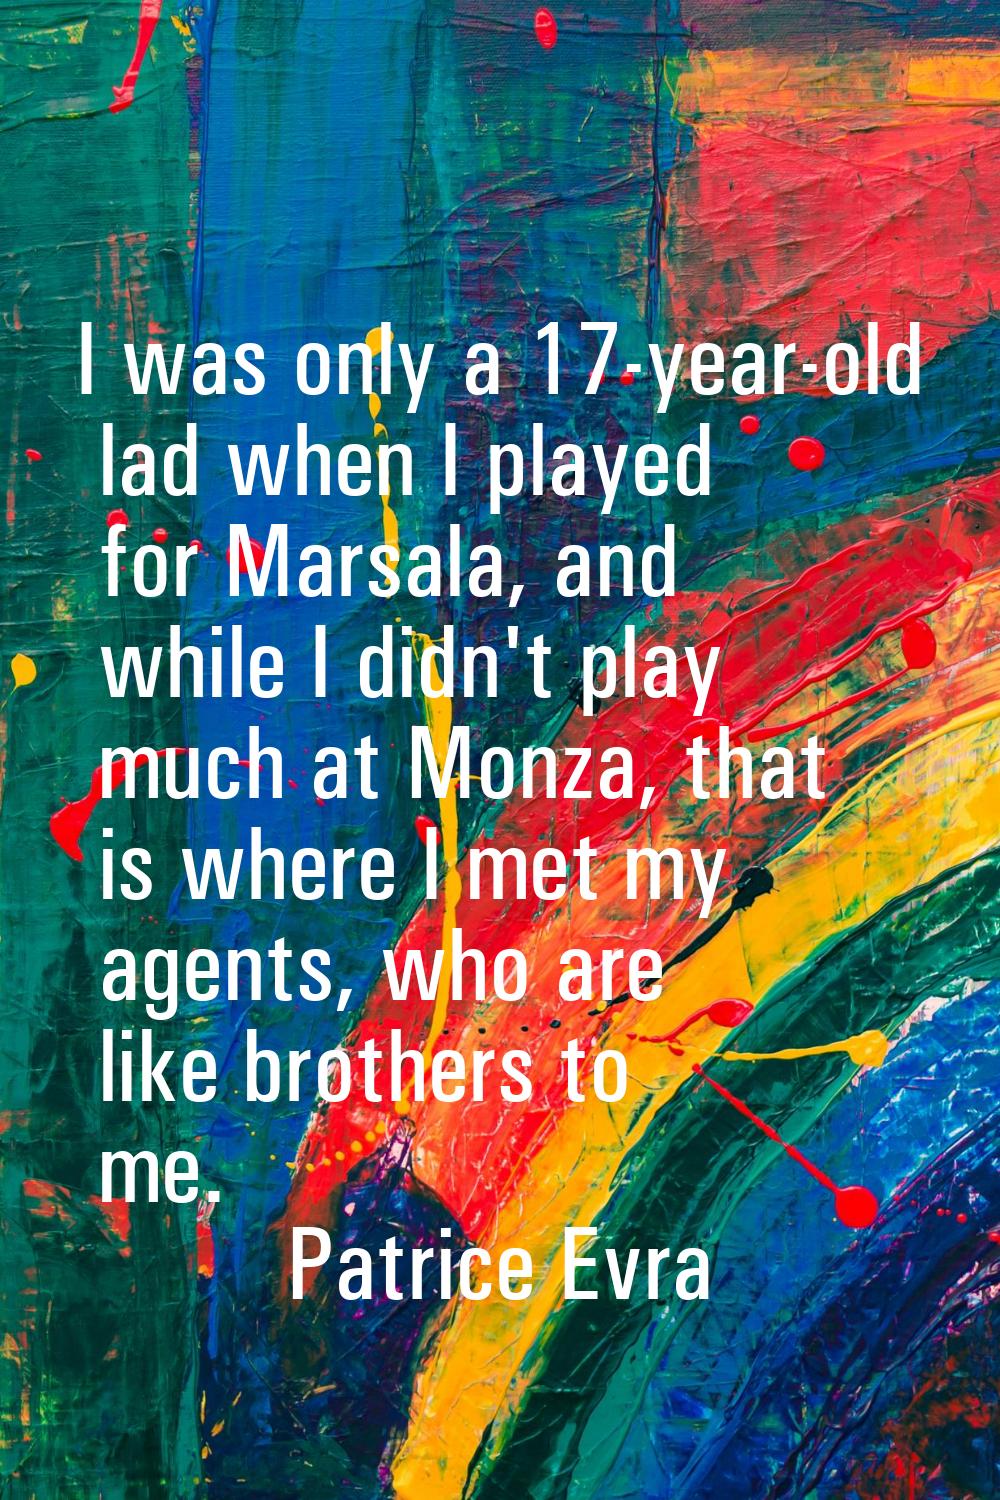 I was only a 17-year-old lad when I played for Marsala, and while I didn't play much at Monza, that